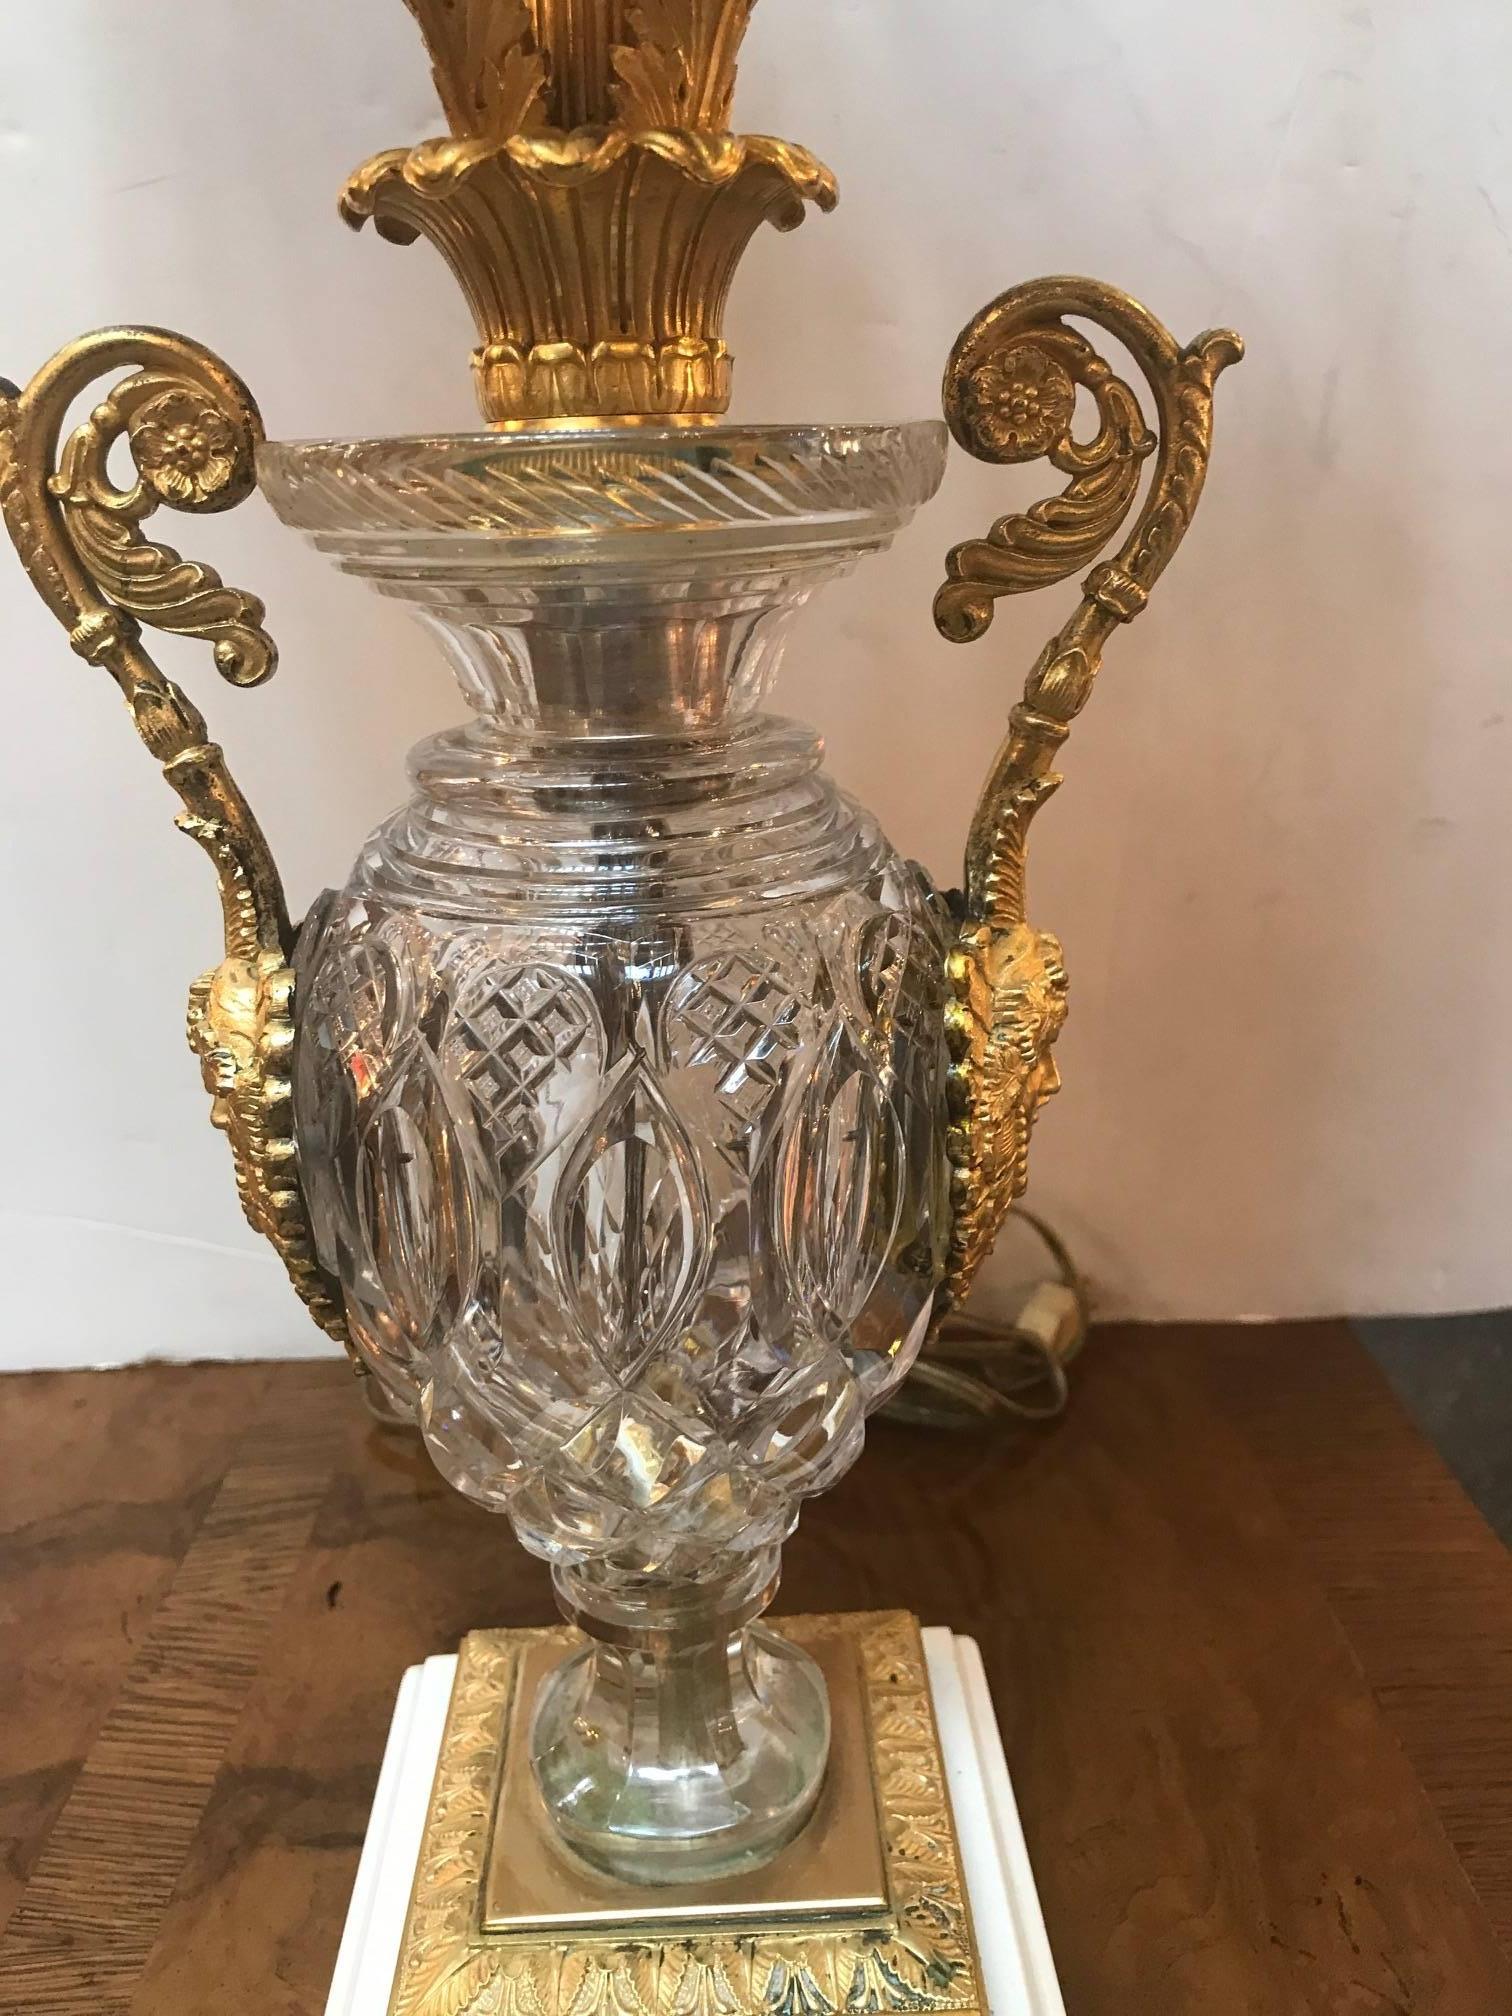 An antique hand-cut crystal and gilt bronze candelabra lamp. The early French Charles X candelabra gilt is original and in excellent condition. The hand-cut urn is attributed to Baccarat and fitted with bronze handles and base with a marble bottom.